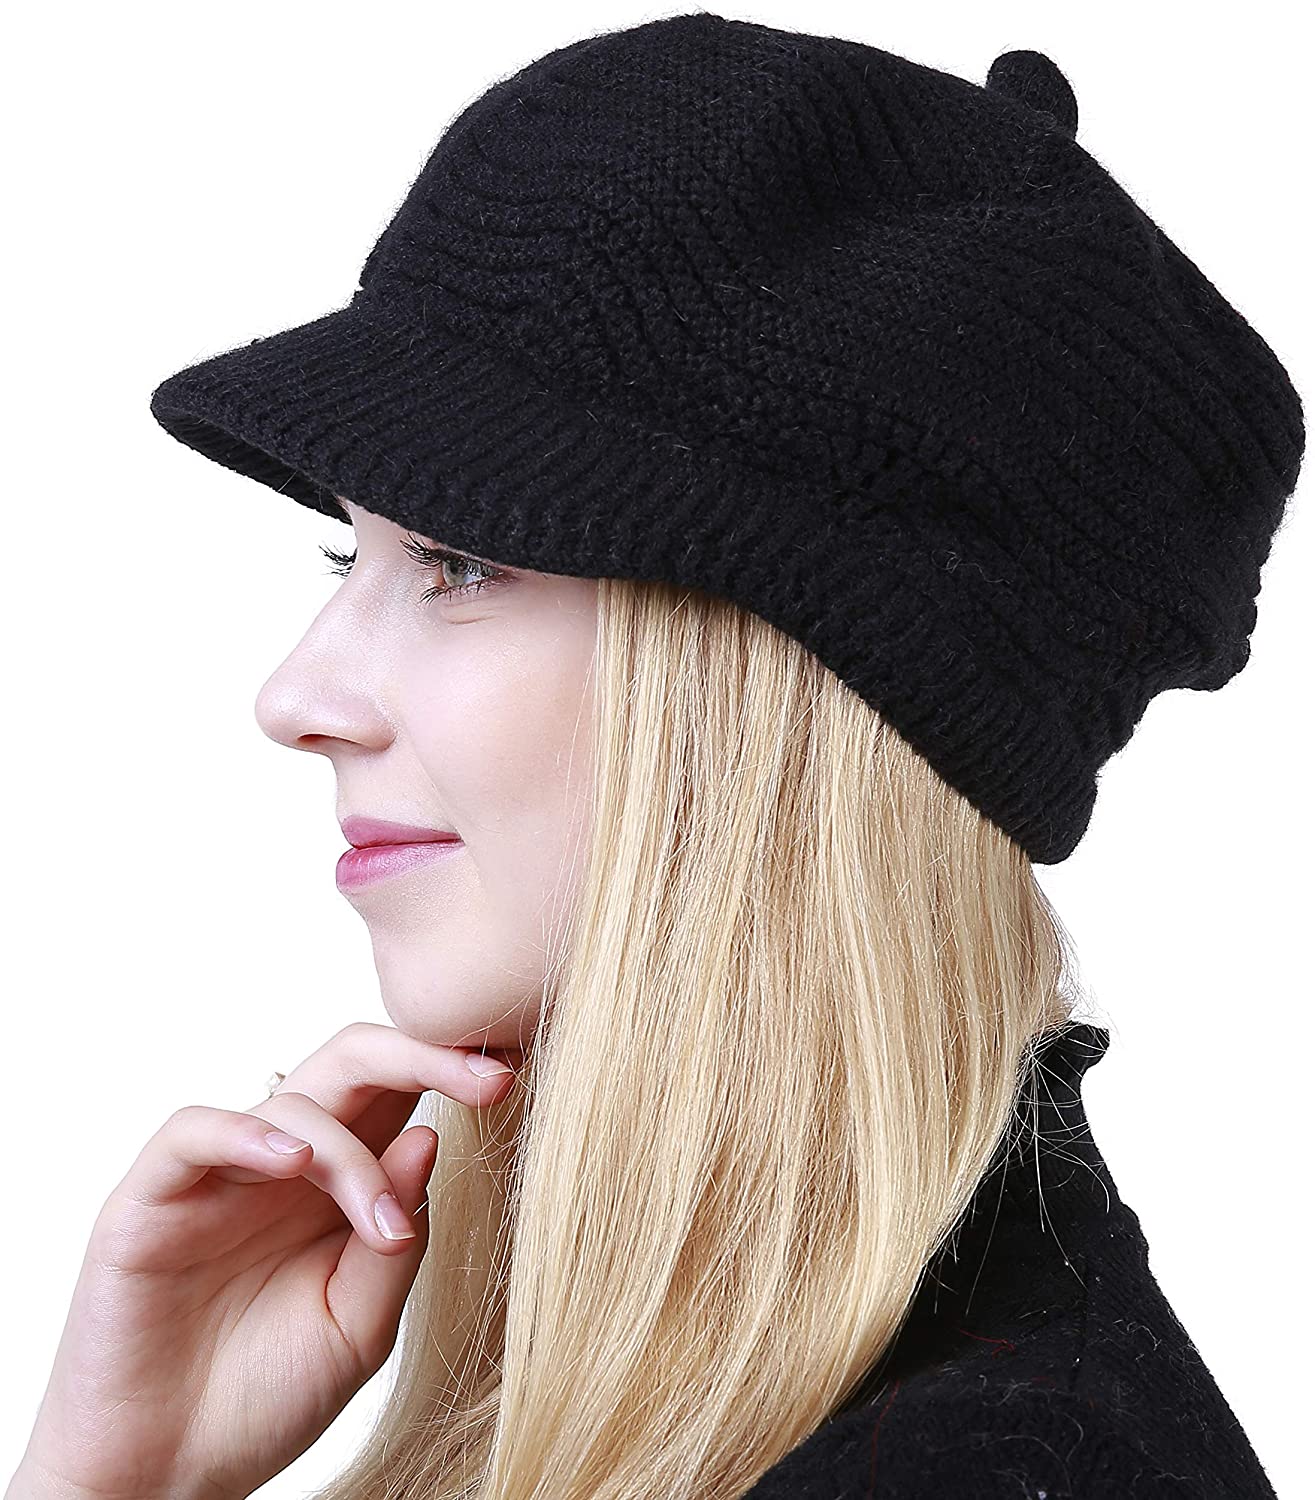 Womens Winter Warm Knitted Hats Slouchy Beanie Hat Cap Cable Knit Skull Hat with Visor 